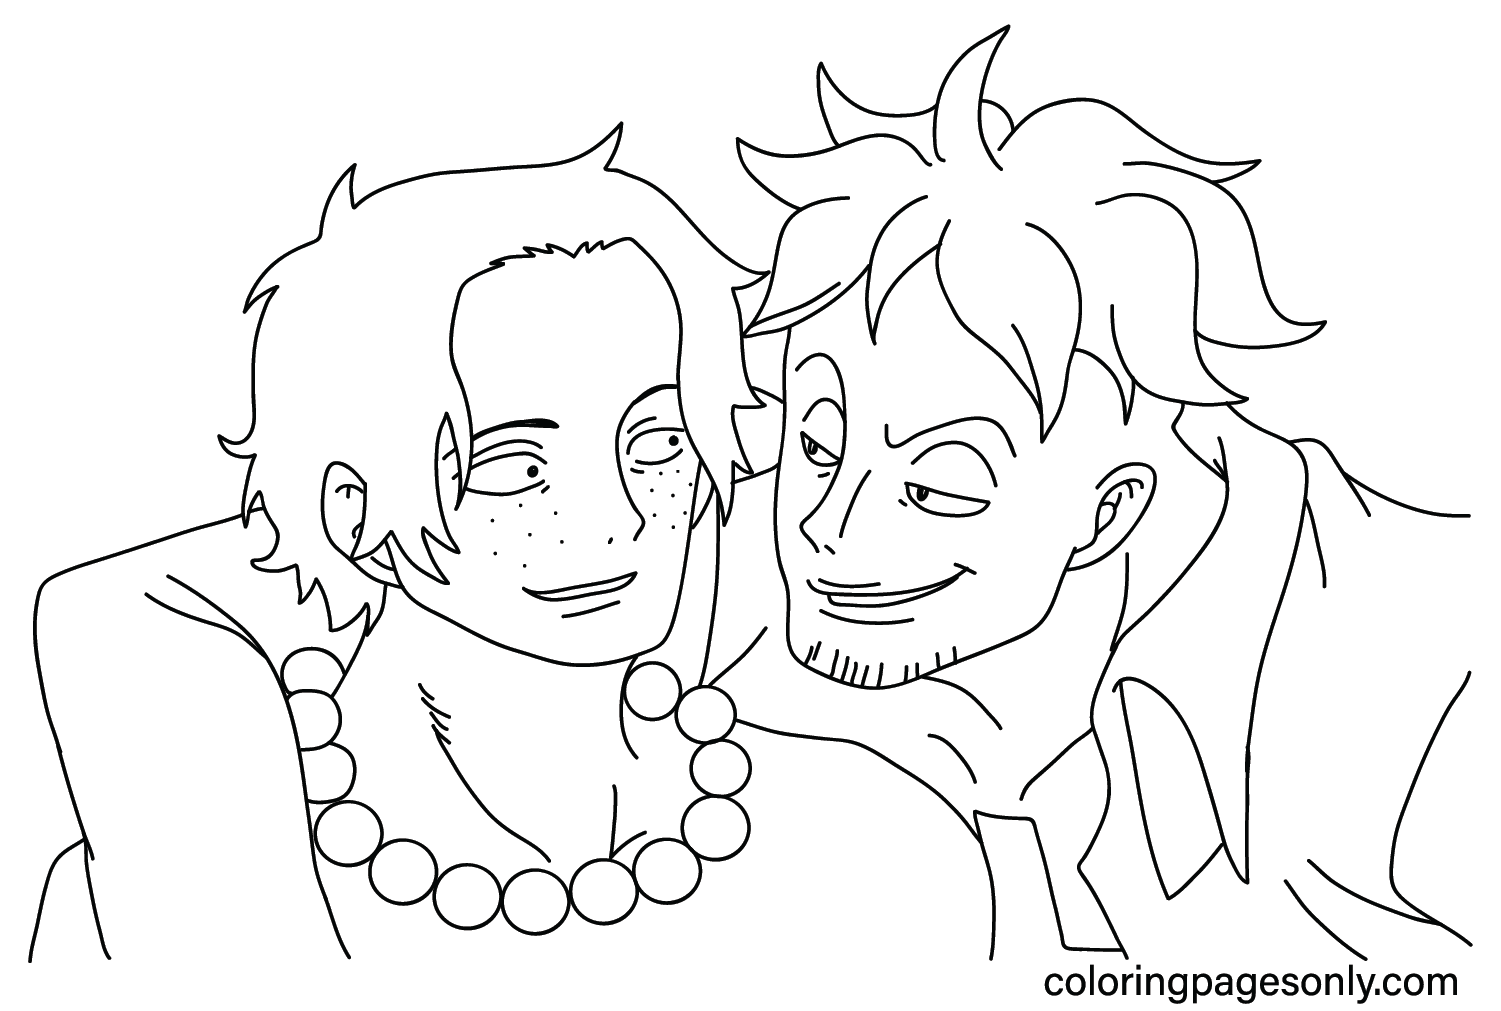 Ace and Marco Coloring Page Free from Portgas D. Ace